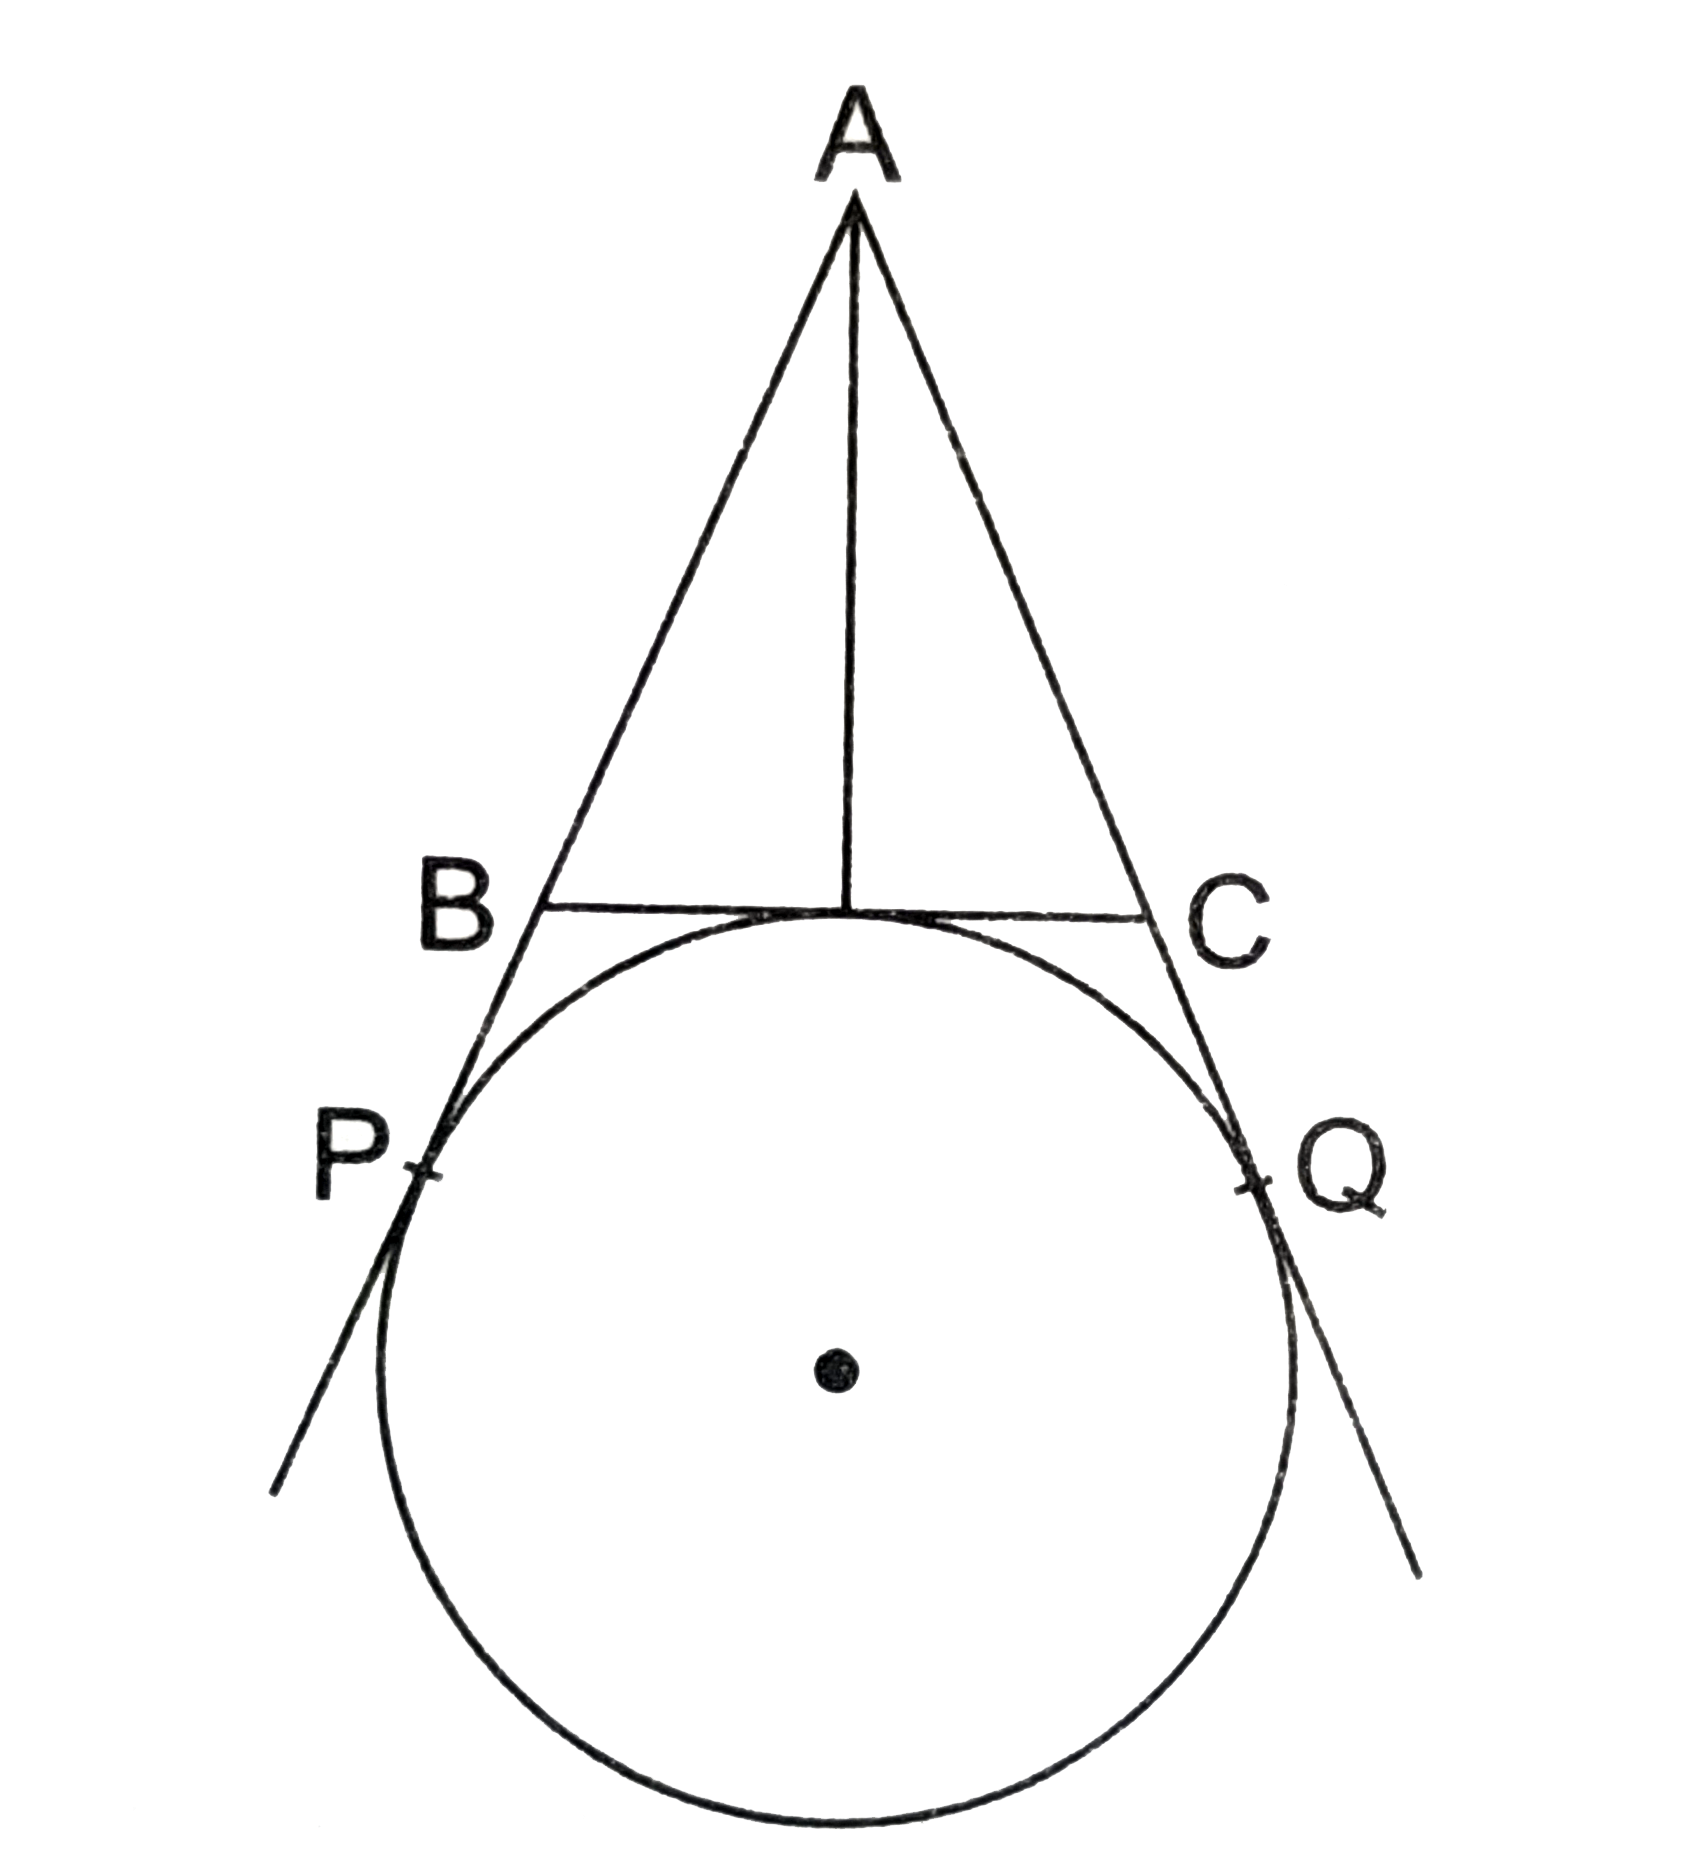 In the given figure, AP, AQ and BC are tangents to the circle. If AB=5cm, AC=6cm and BC=4cm then the length of AP is